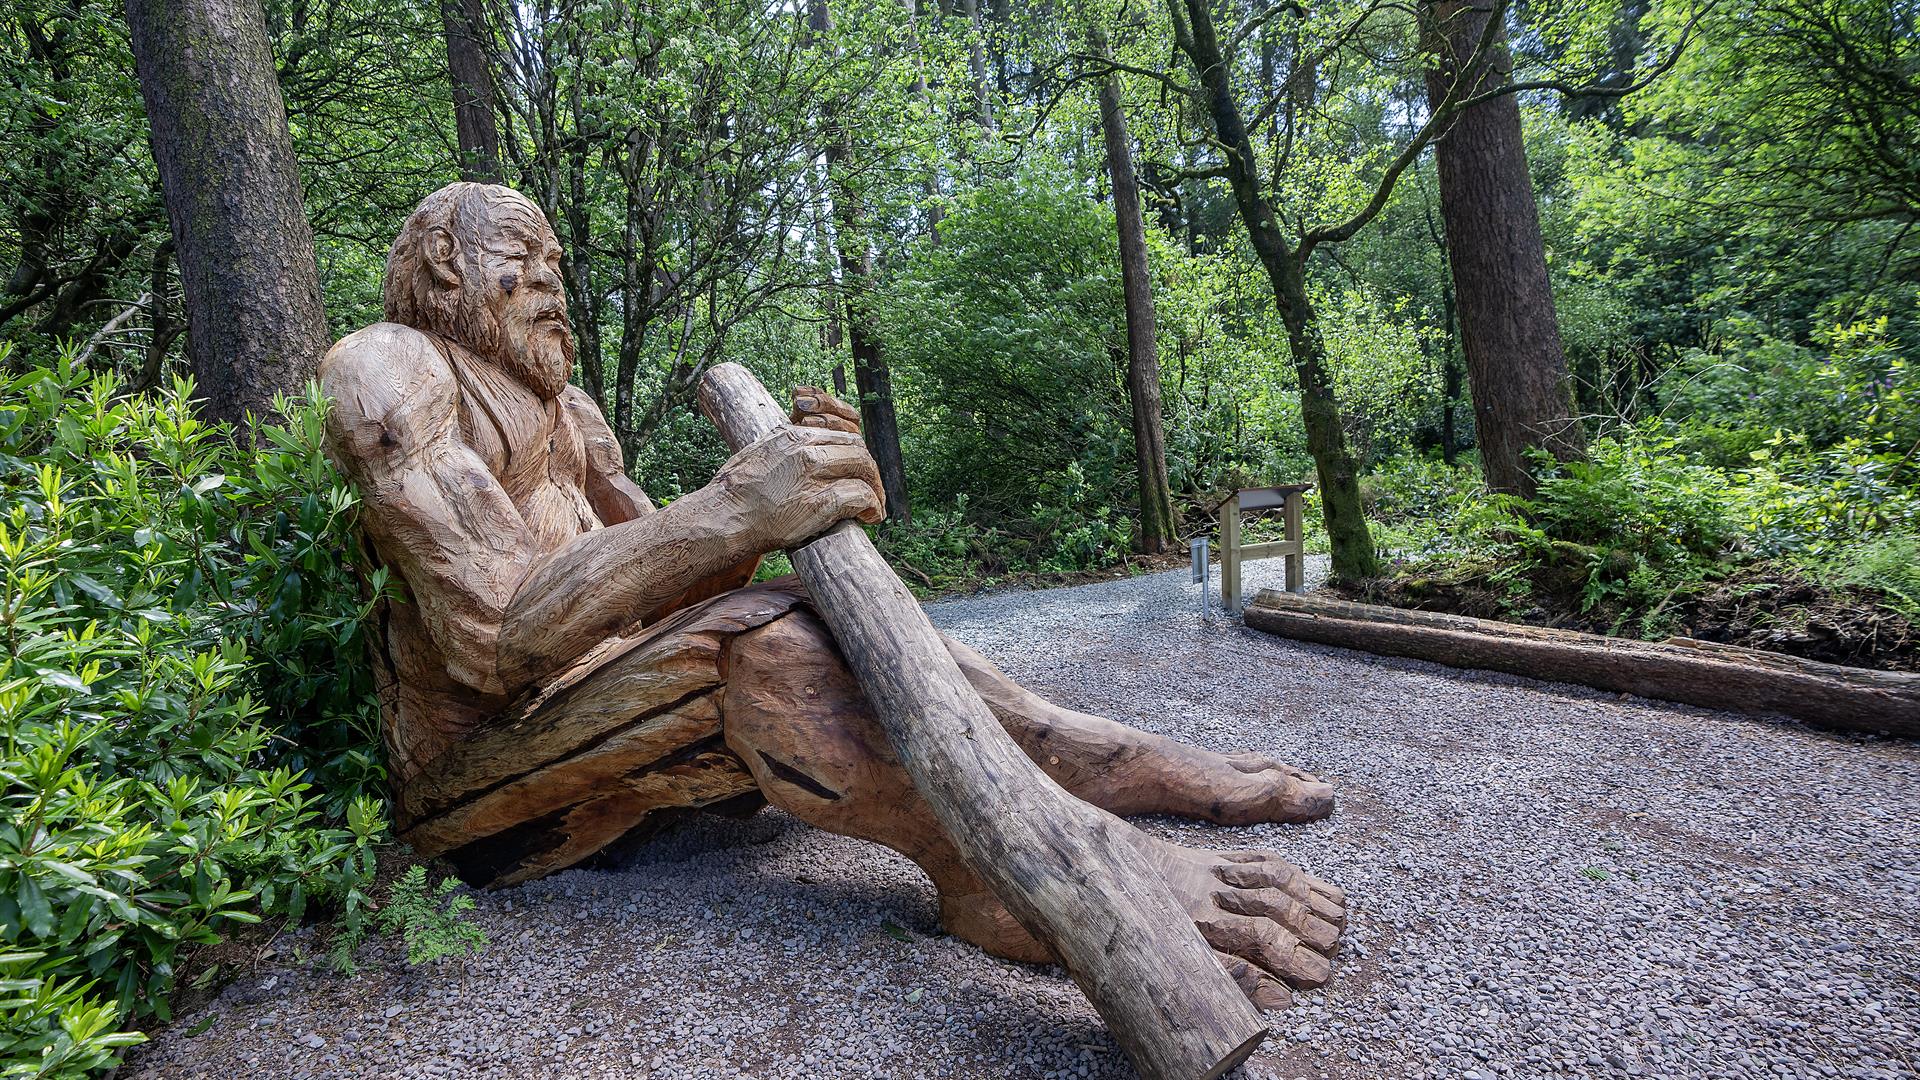 Large wooden sculpture of a giant sitting on the ground leaning against a tree holding a big stick.